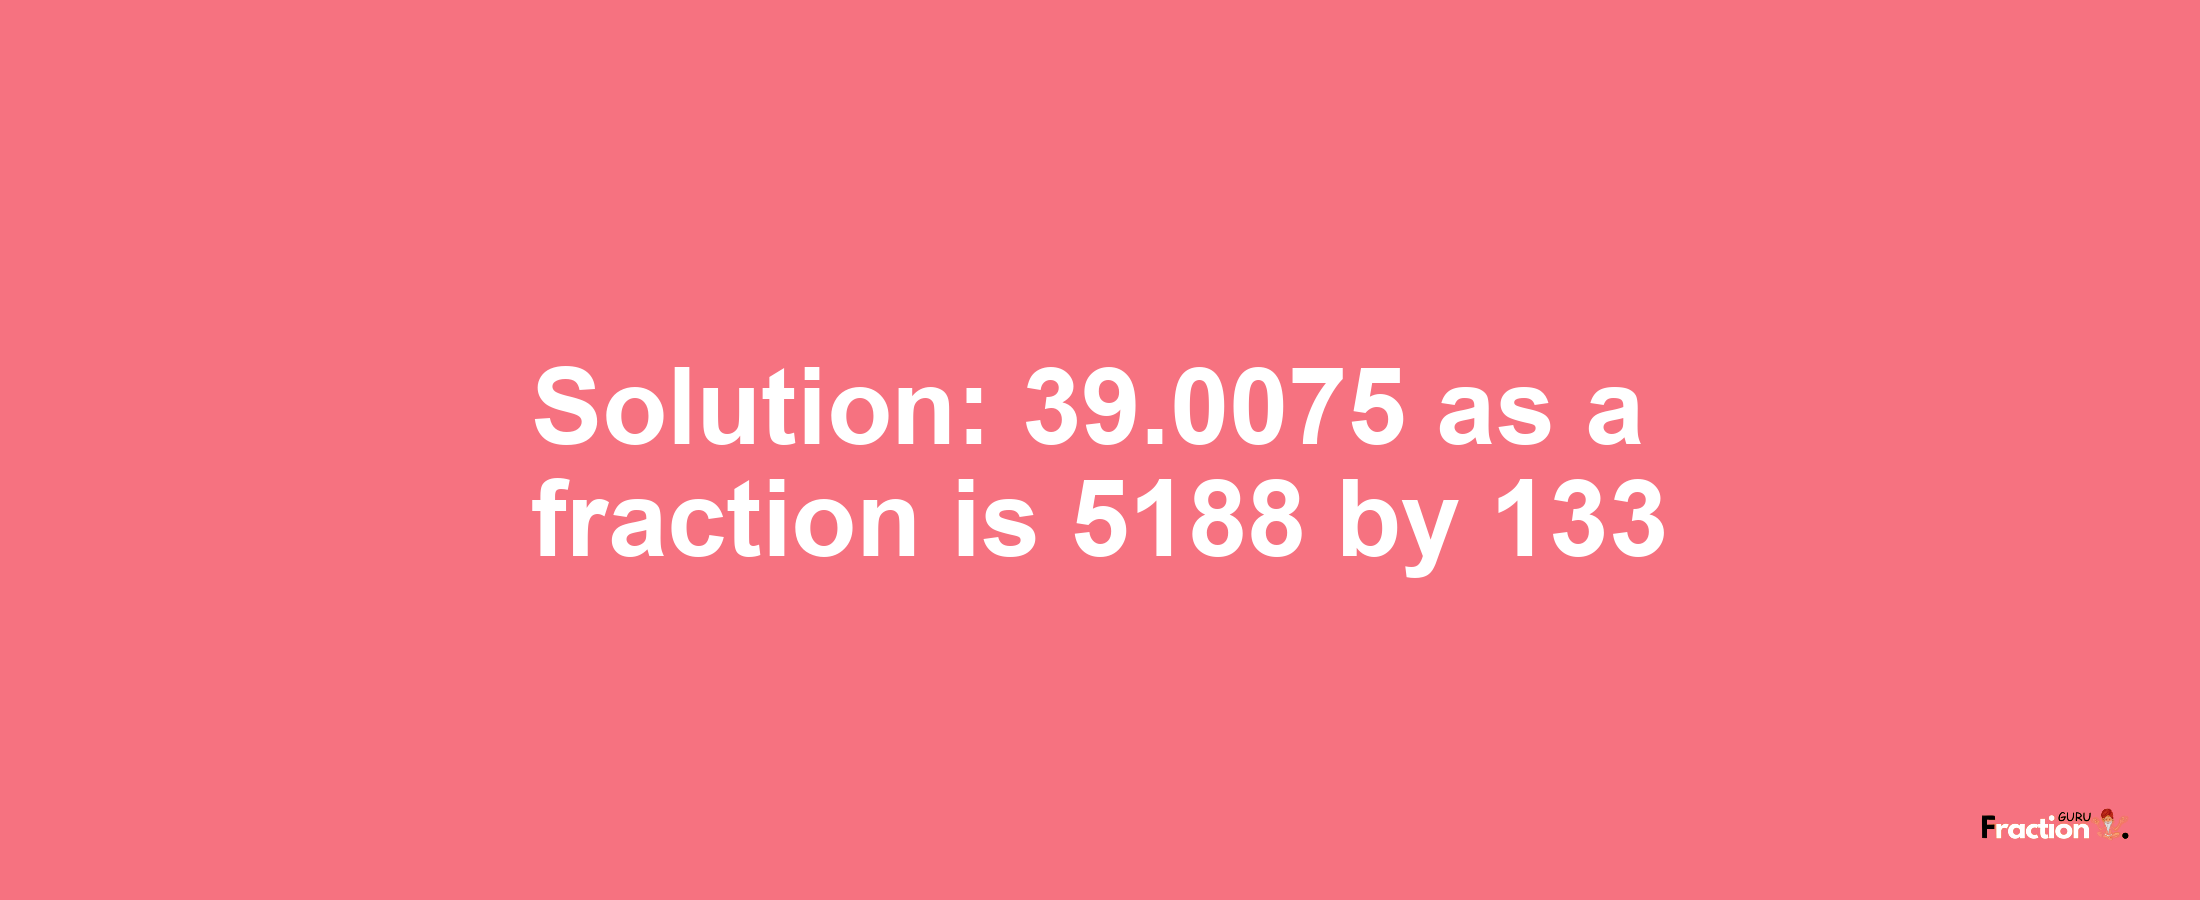 Solution:39.0075 as a fraction is 5188/133